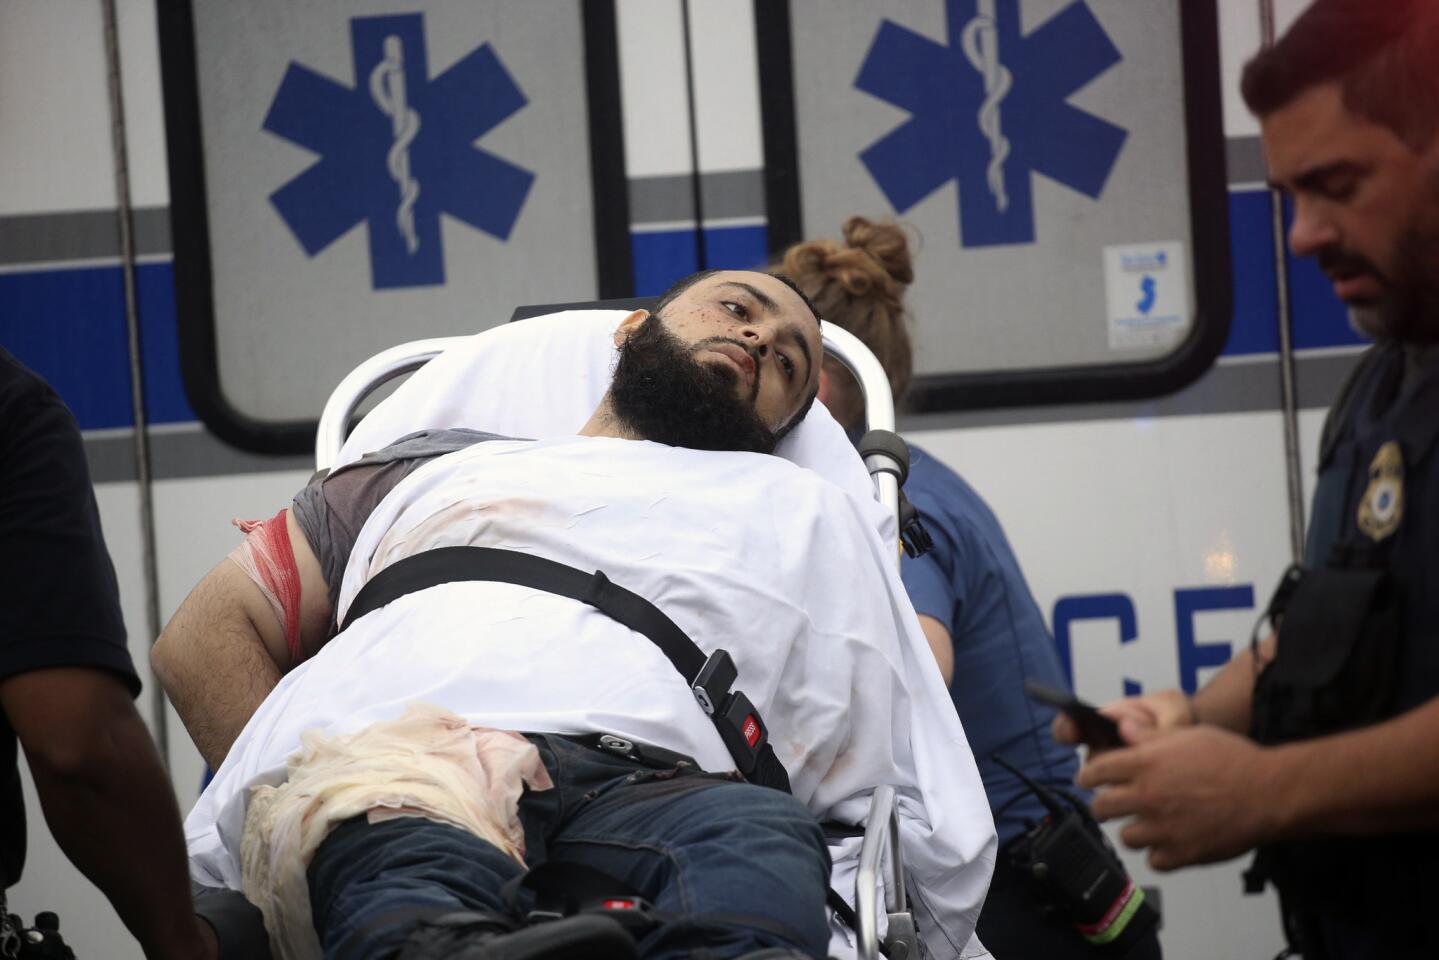 Ahmad Khan Rahami is taken into custody after a shootout with police Monday, Sept. 19, 2016, in Linden, N.J.